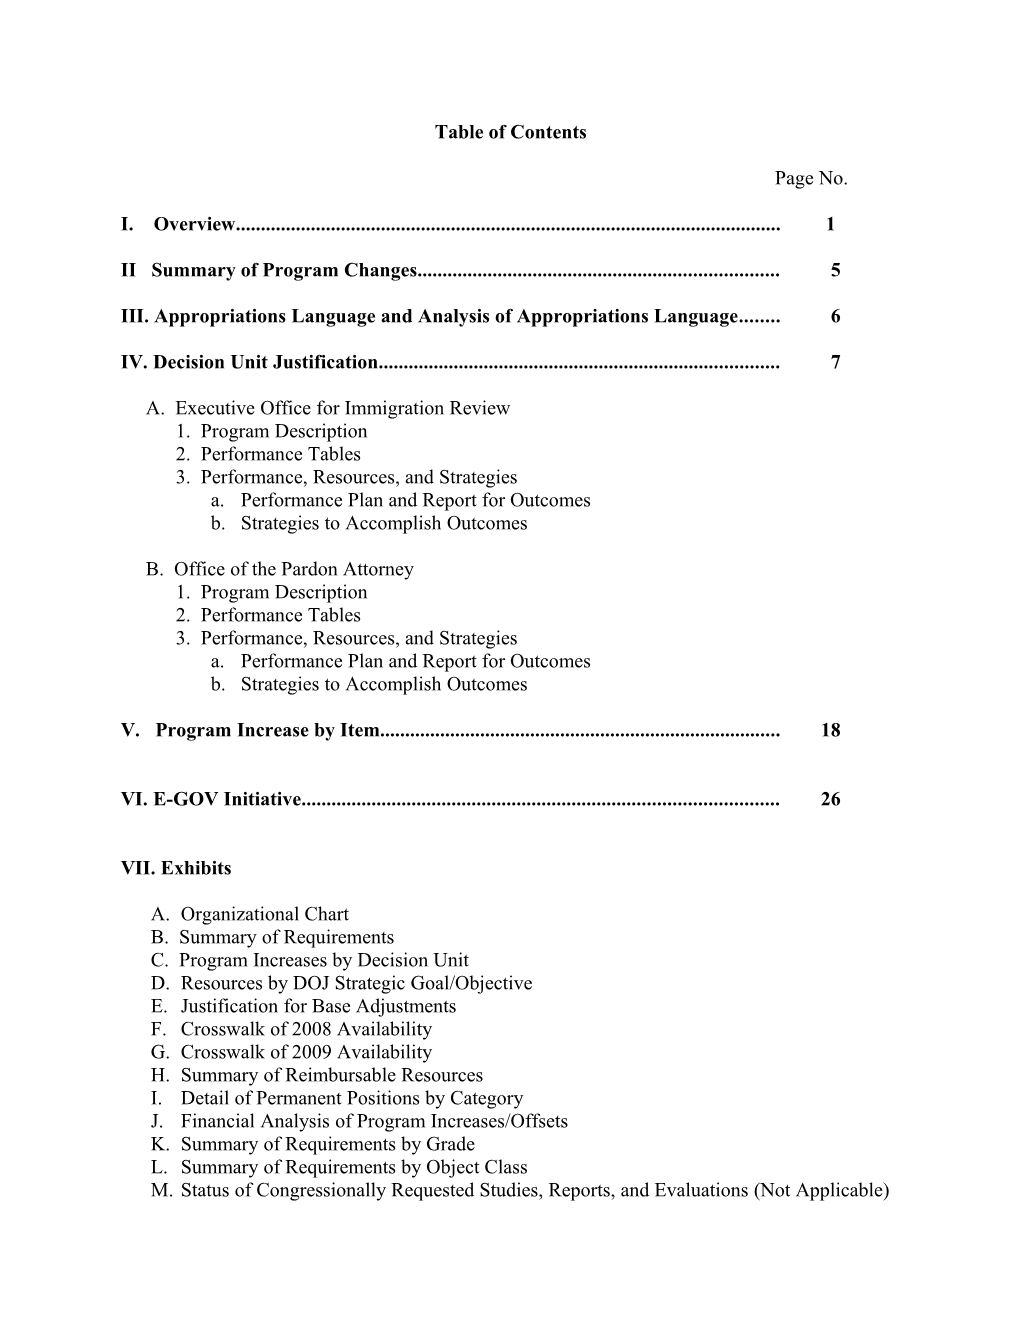 III. Appropriations Language and Analysis of Appropriations Language 6